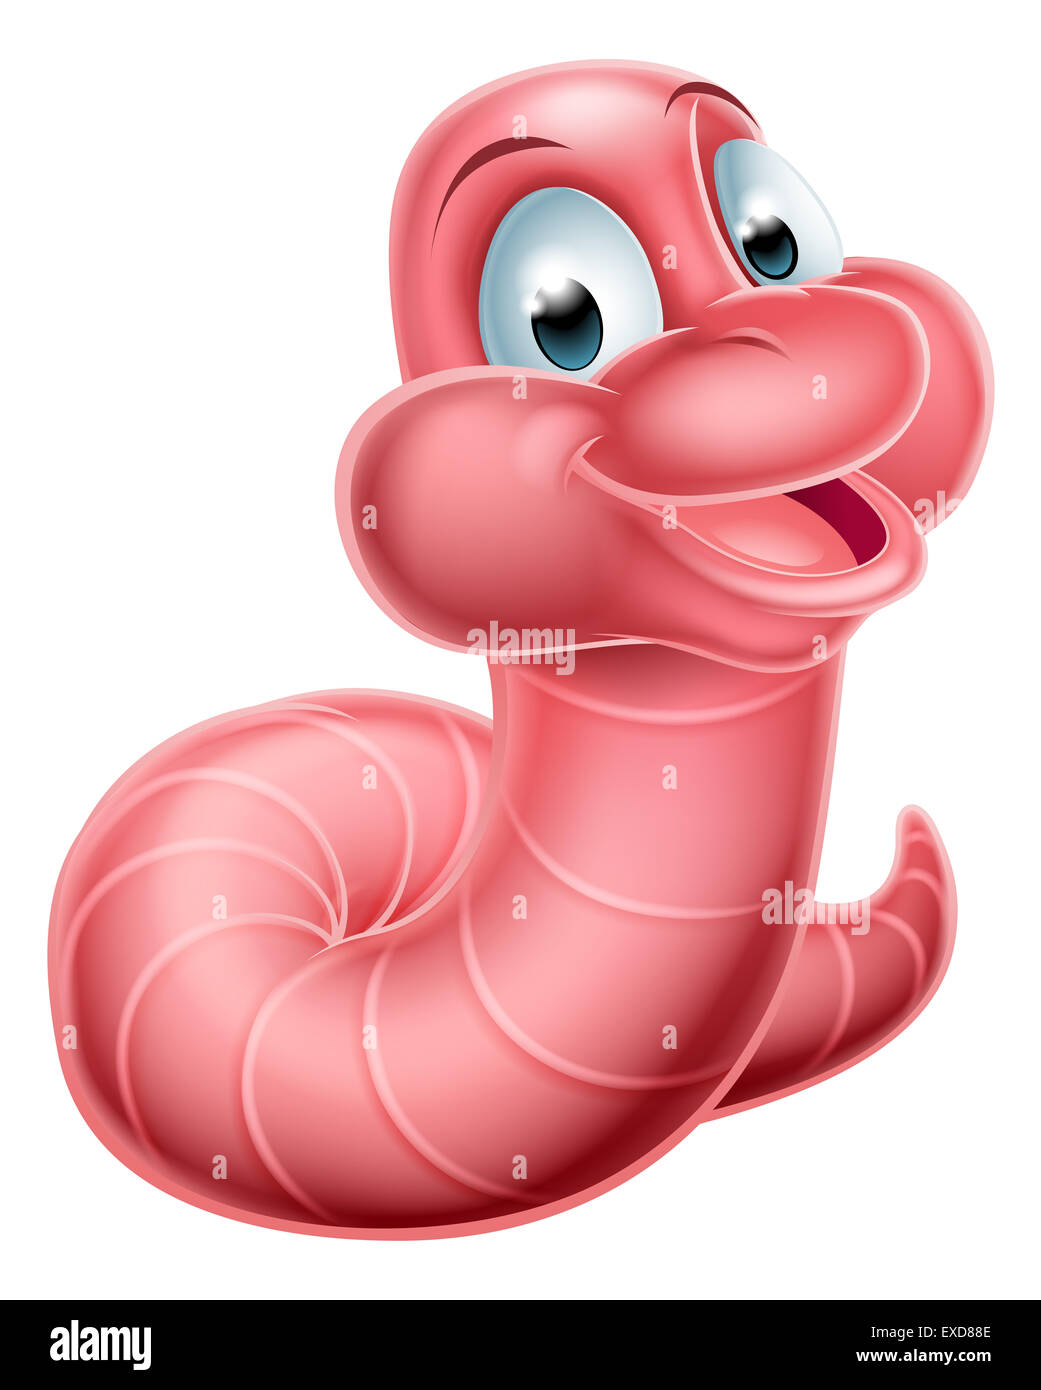 An illustration of a happy cute pink cartoon caterpillar worm or earthworm  mascot Stock Photo - Alamy